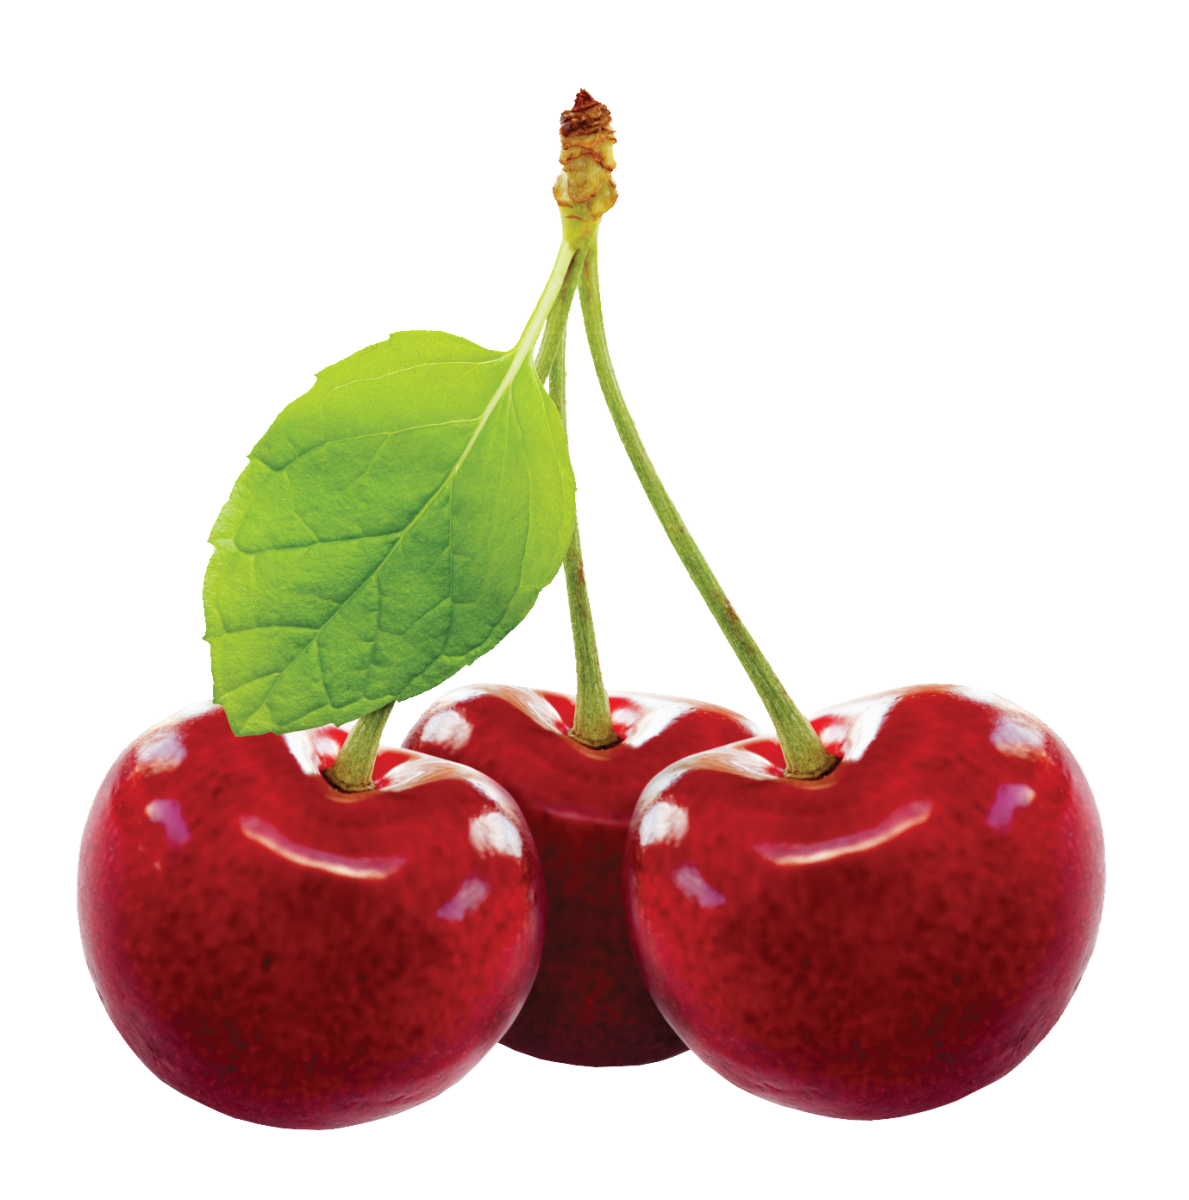 Download PNG image - Cherry Fruit PNG Image 